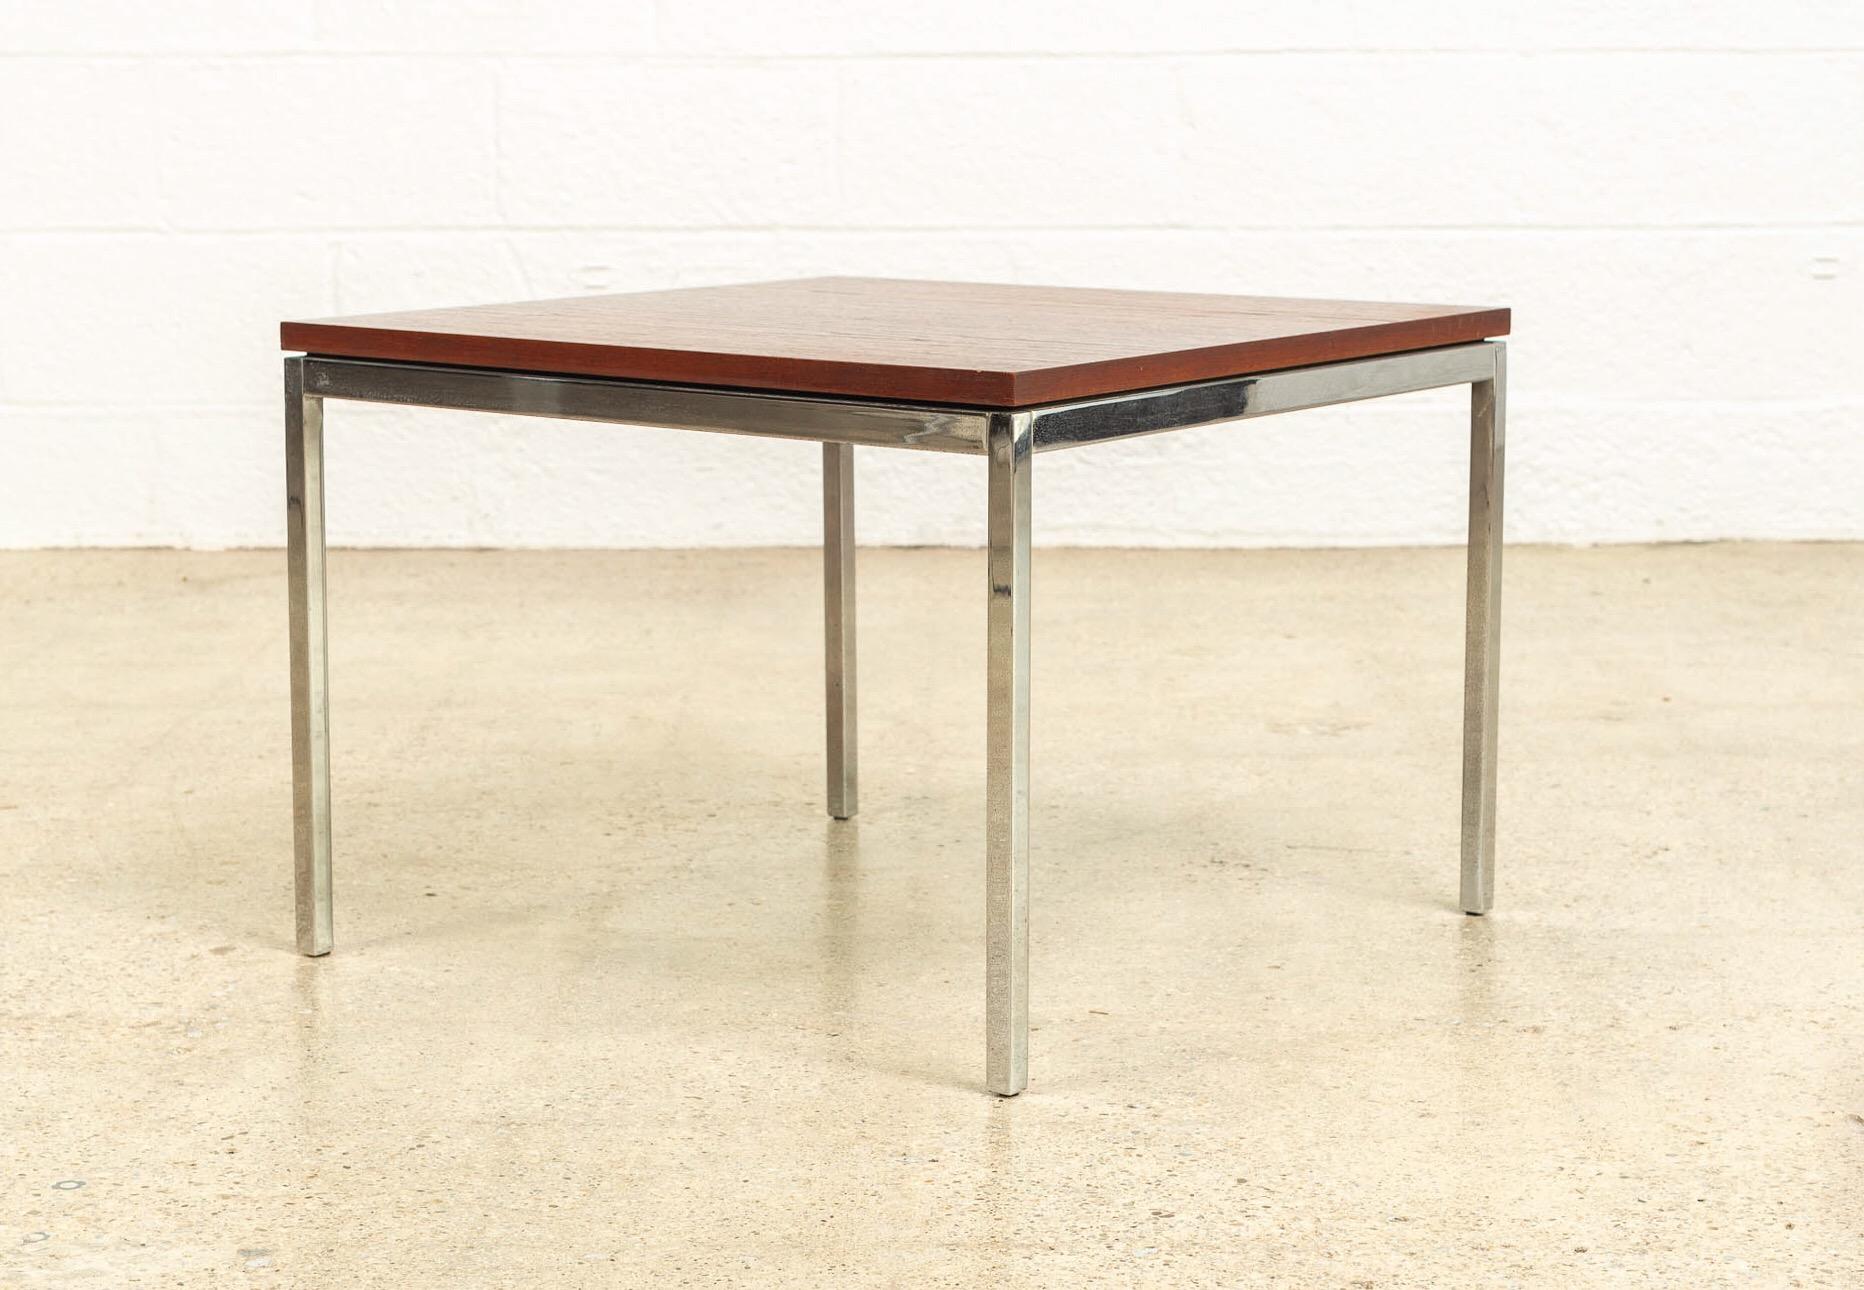 This vintage Mid-Century Modern Florence Knoll for Knoll Associates, Inc. square wood coffee table is circa 1960 and features a walnut wood top on a steel frame. This iconic table is a mid century modern classic and exemplifies the clean, minimalist